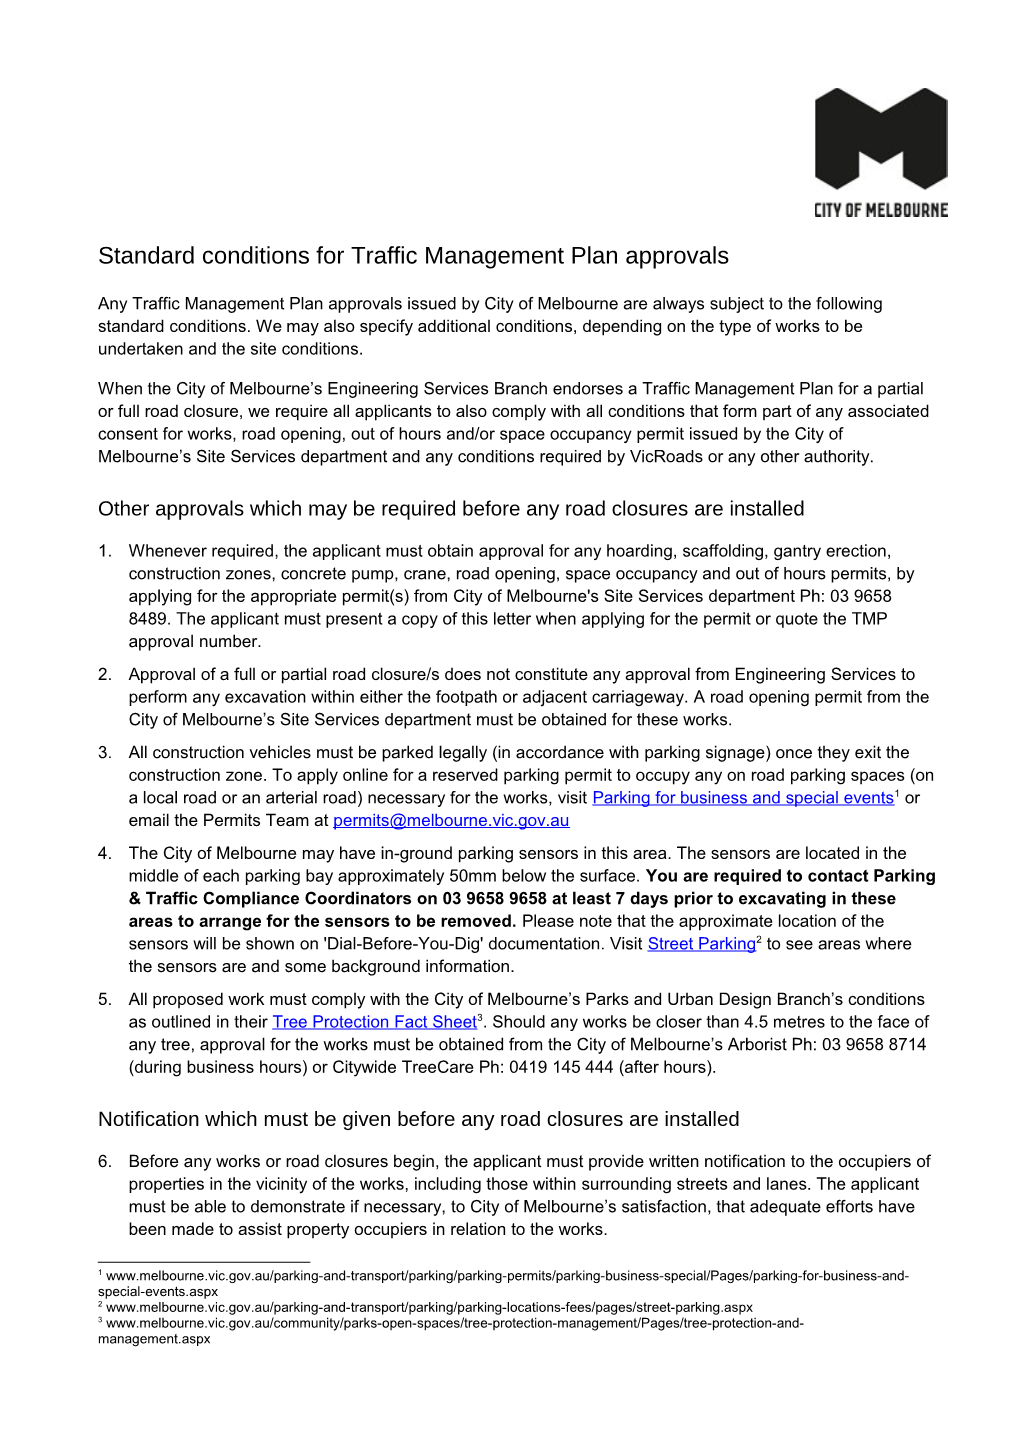 Standard Conditions for Traffic Management Plan Approvals